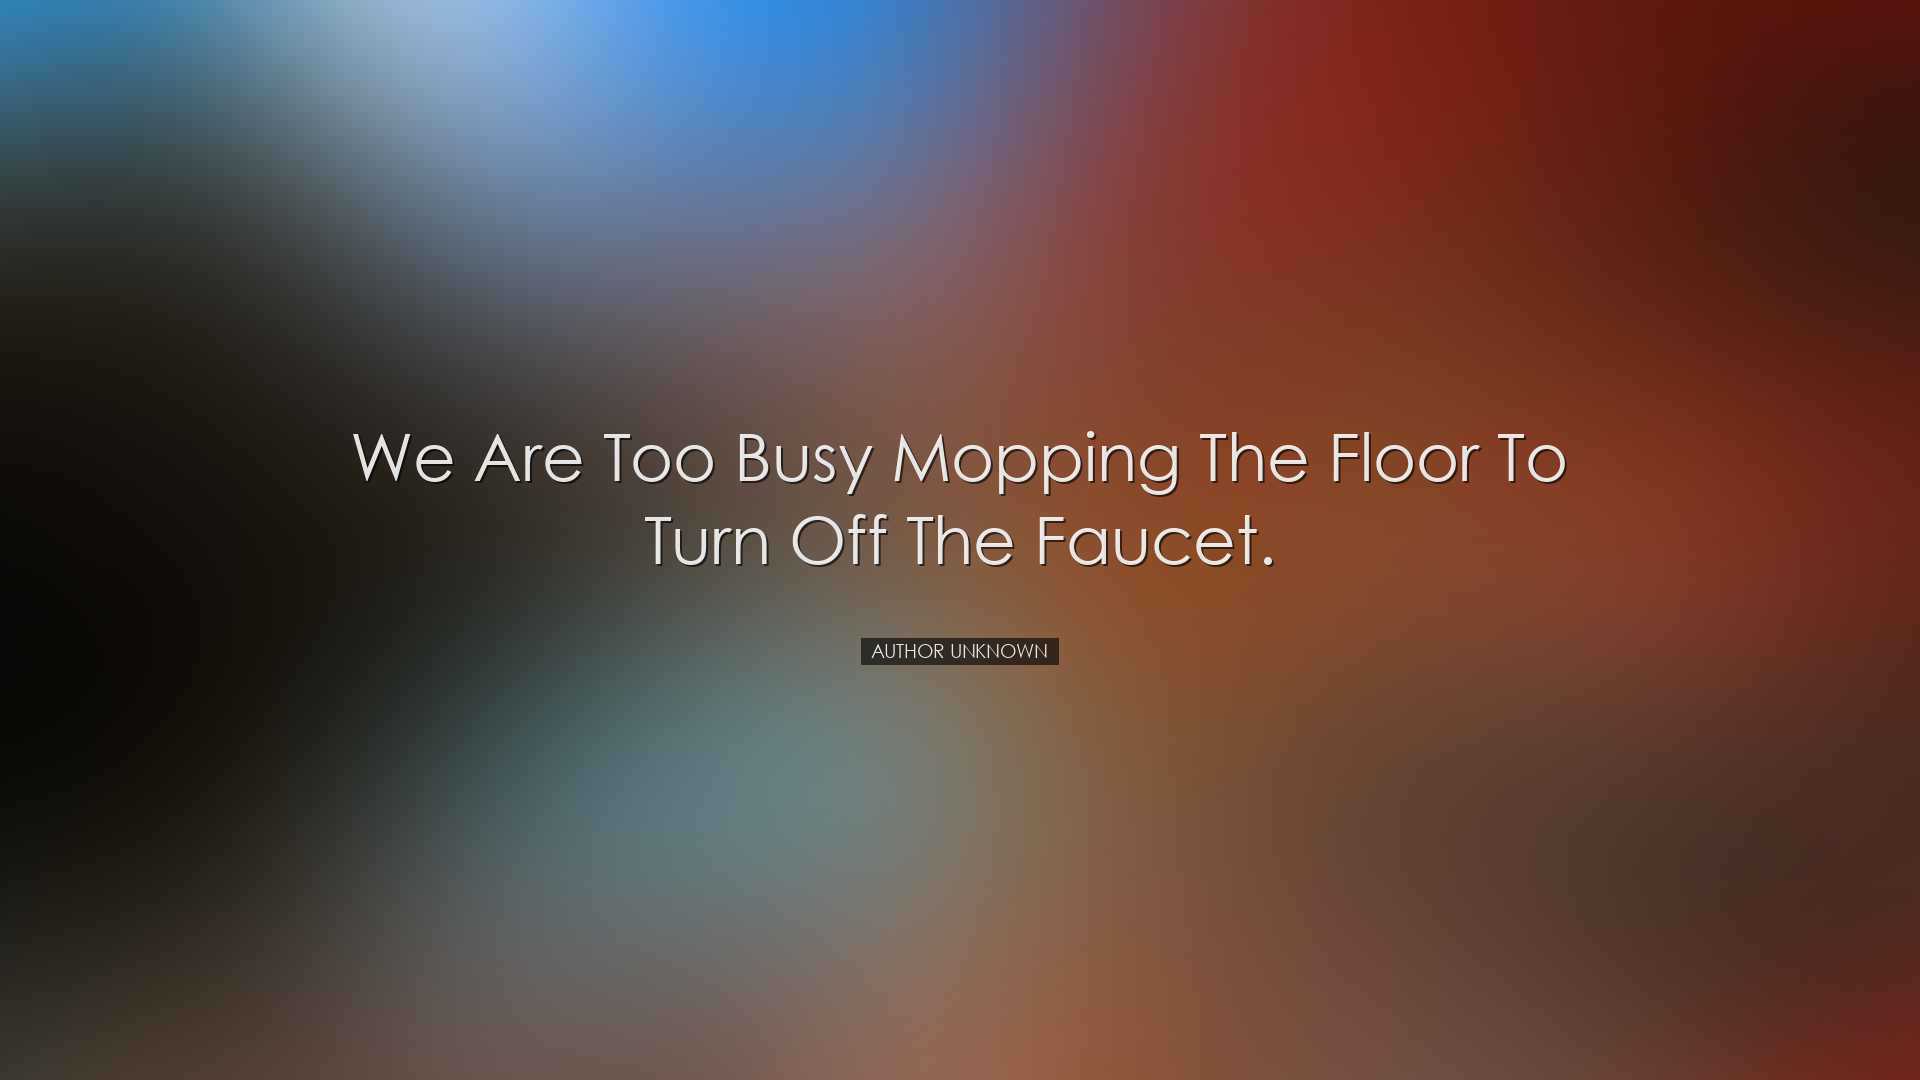 We are too busy mopping the floor to turn off the faucet. - Author